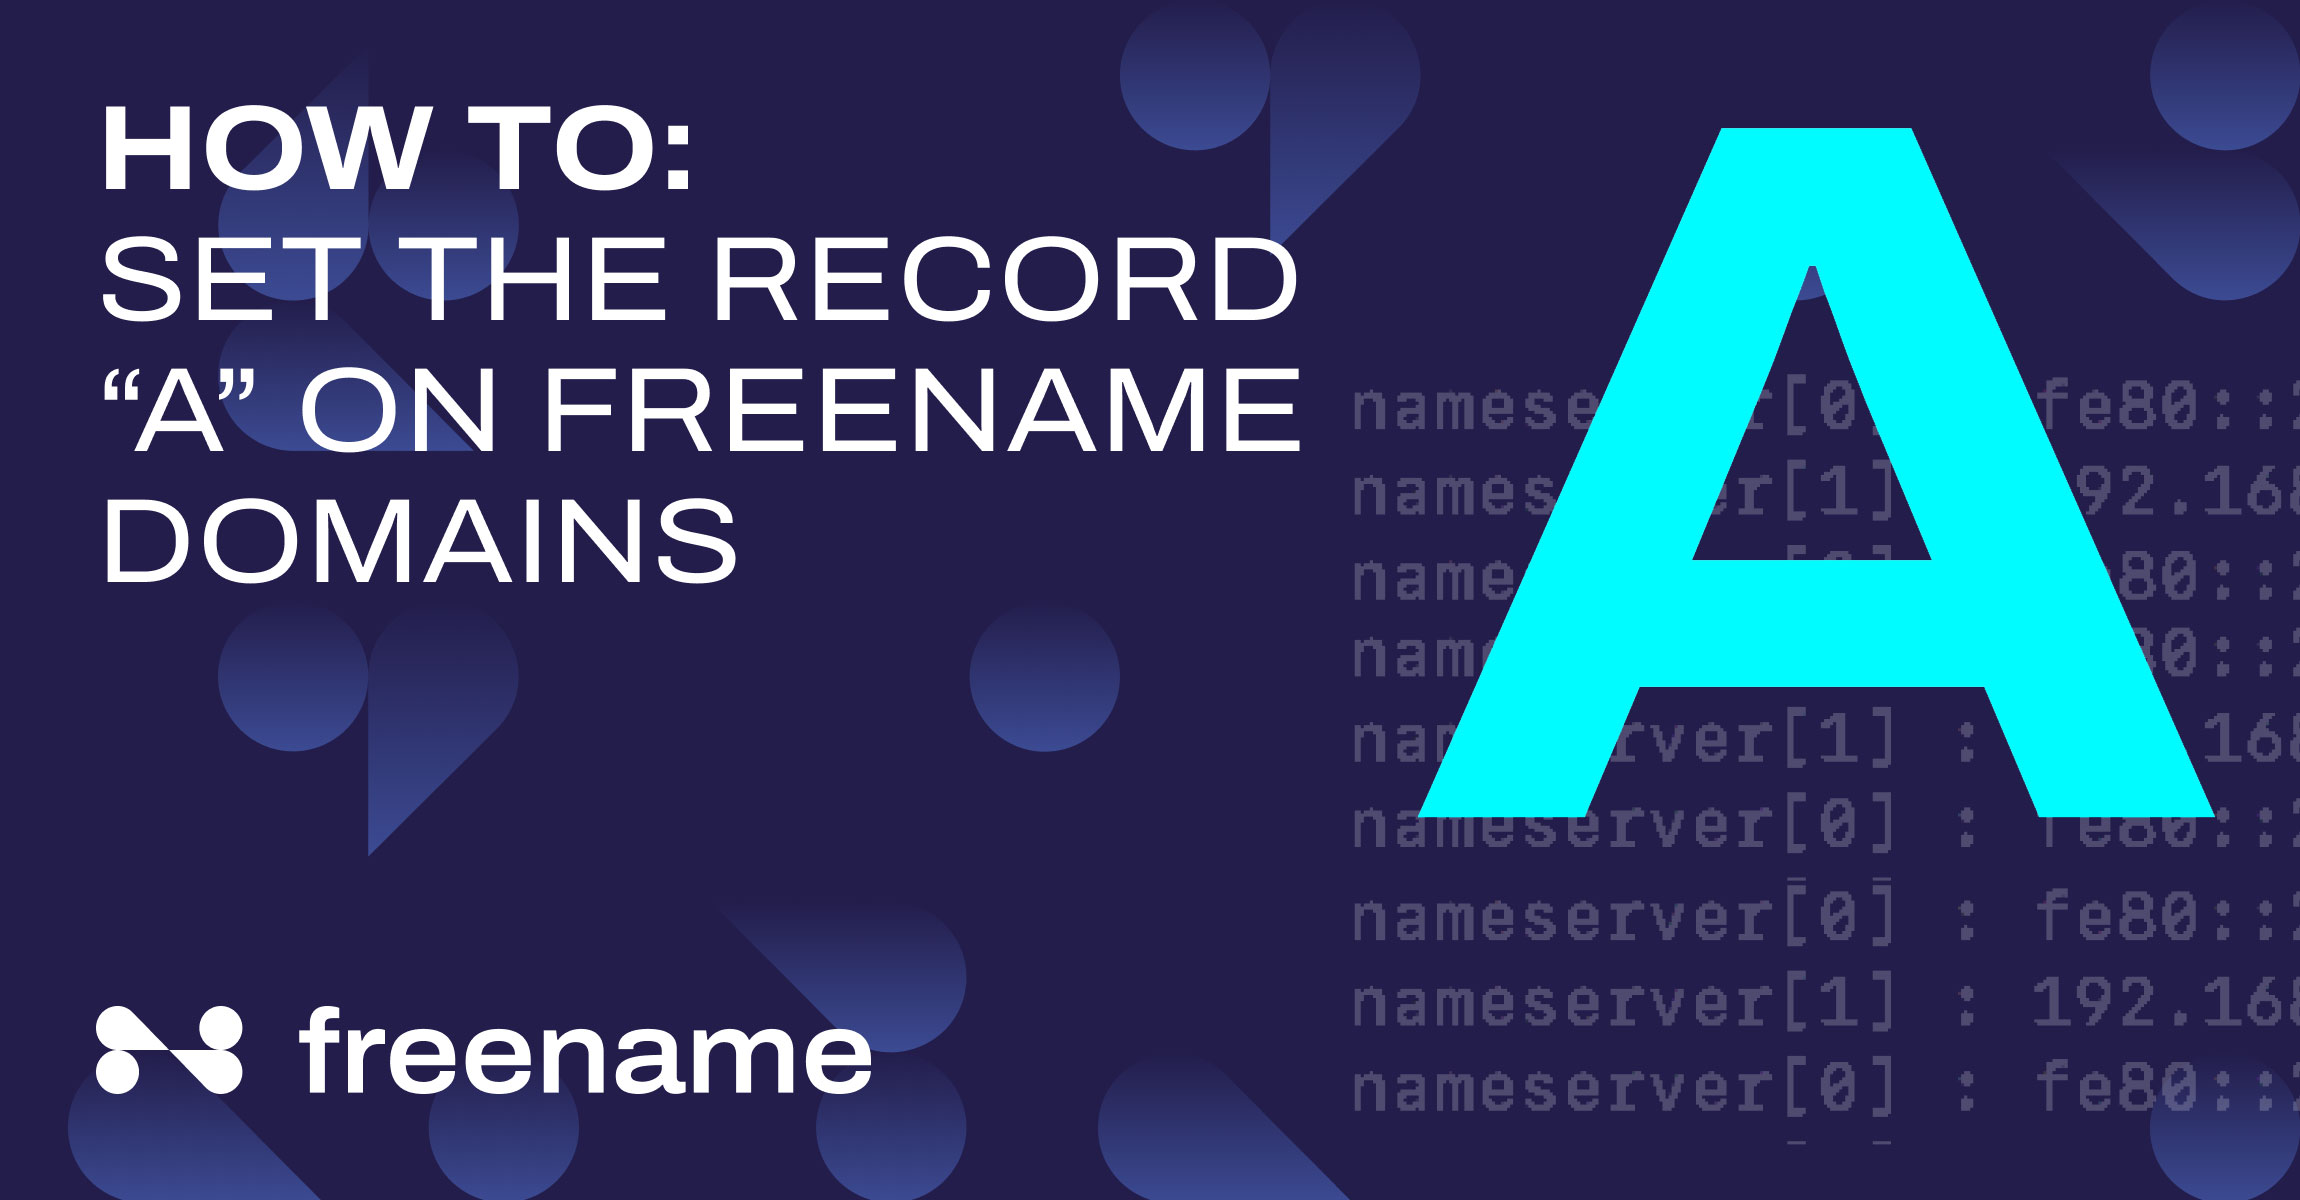 How To: Set the Record "A" on Freename Domains